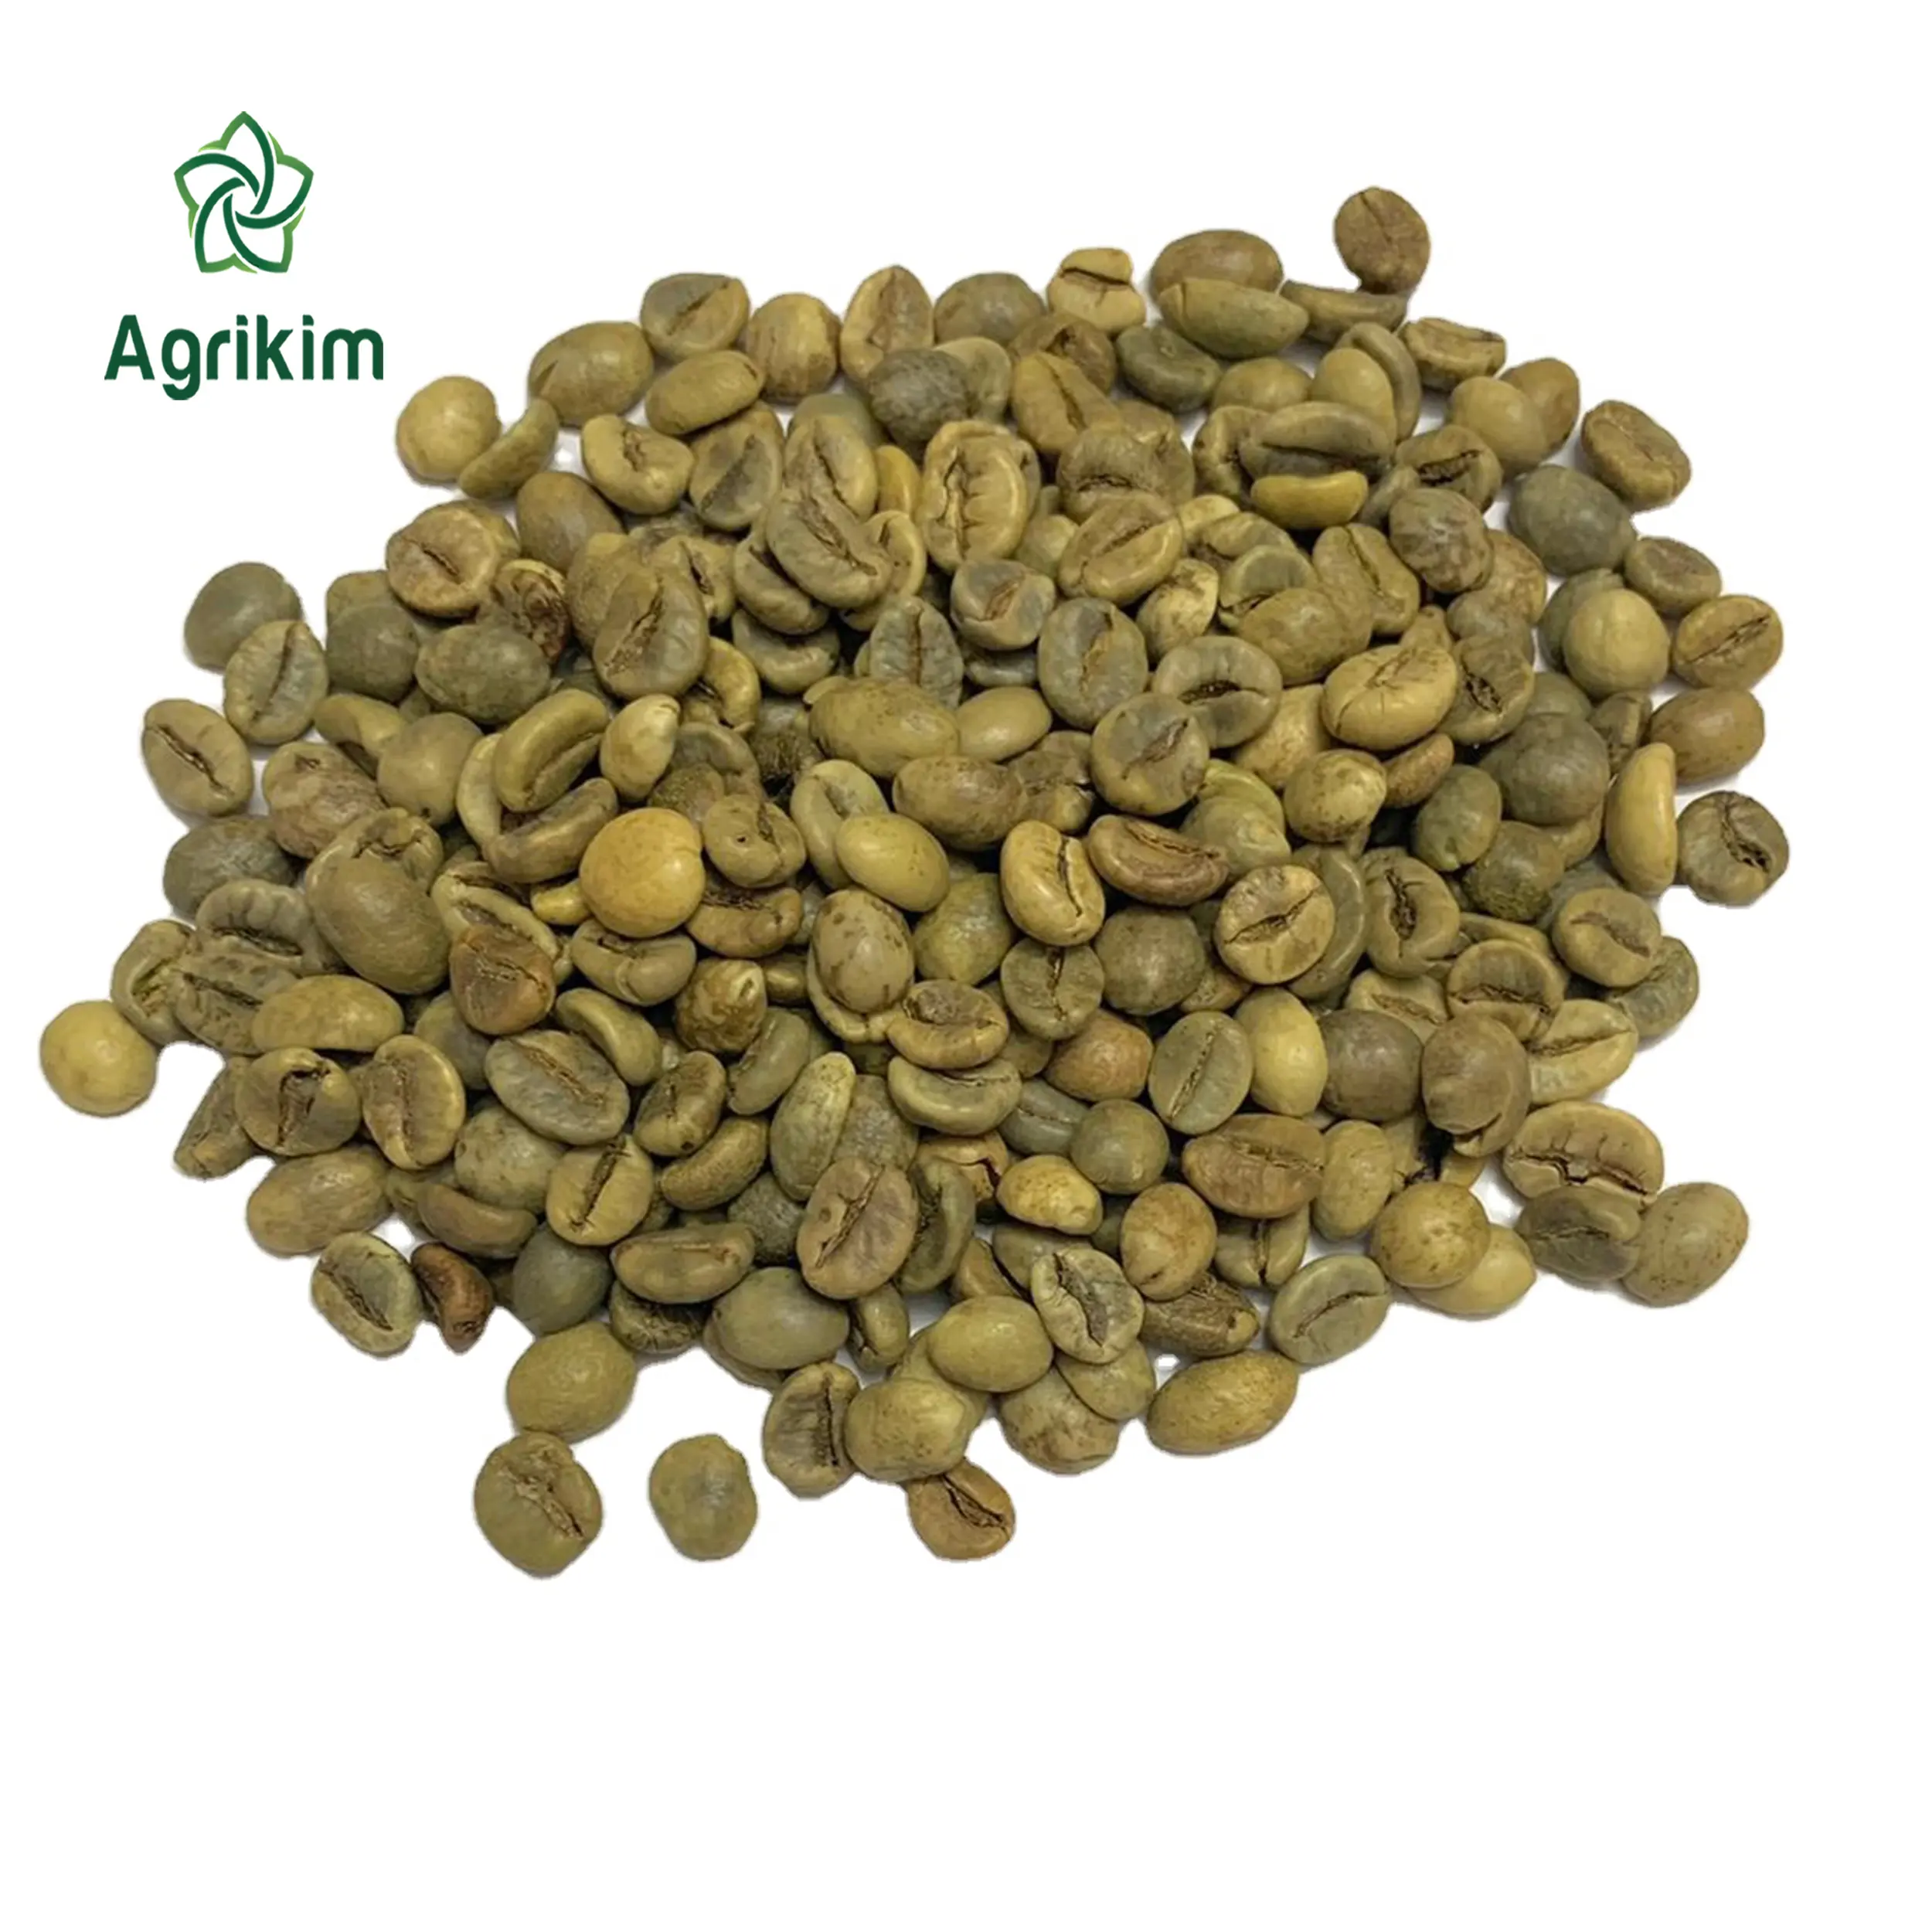 [Top 1 manufacturer] Fully certified raw coffee beans/whole beans coffee with the best price and full export certifications